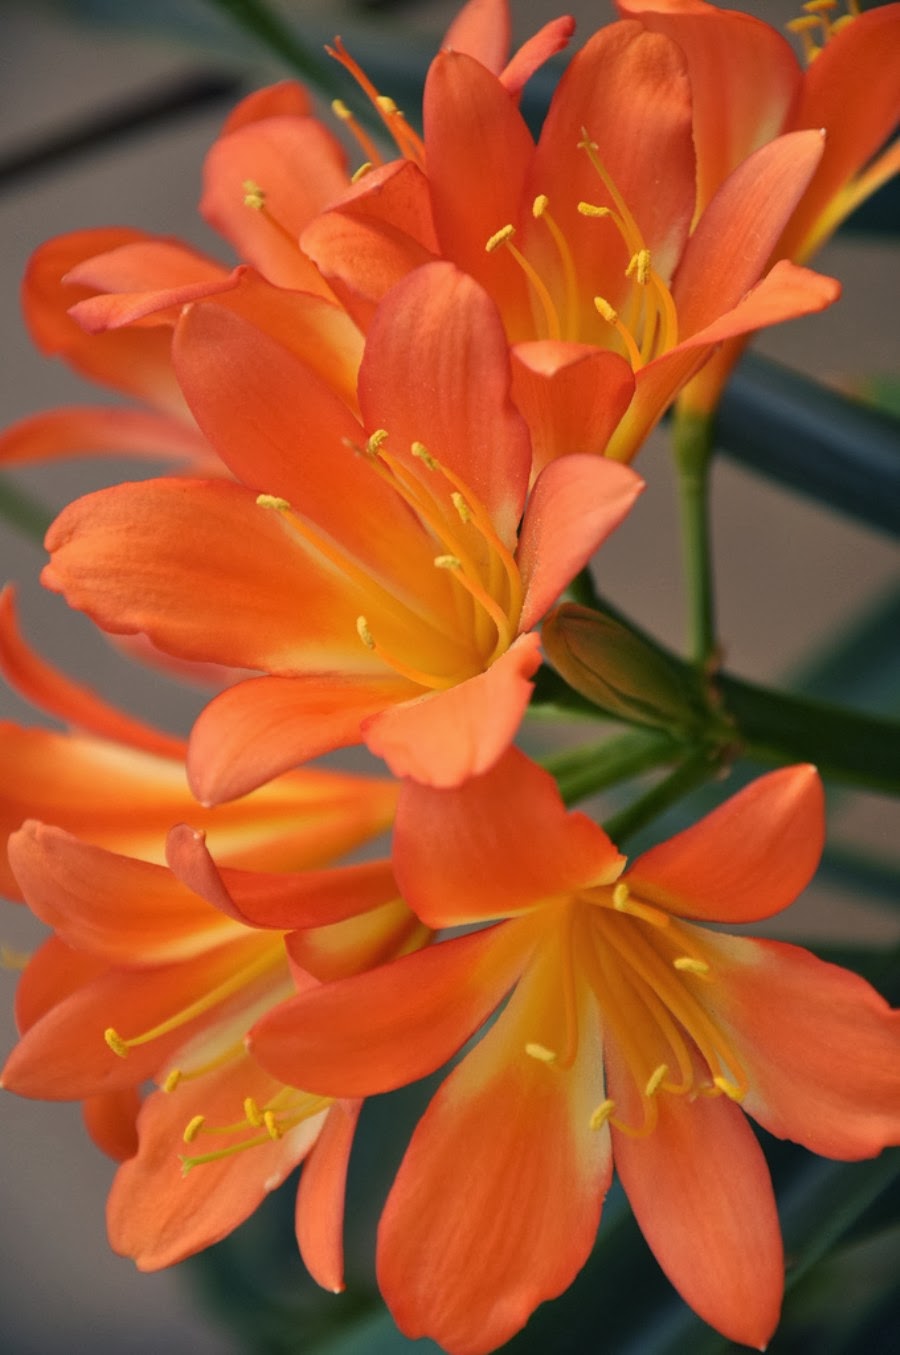 beautiful flowers wallpapers for mobile,flower,orange,petal,plant,natal lily